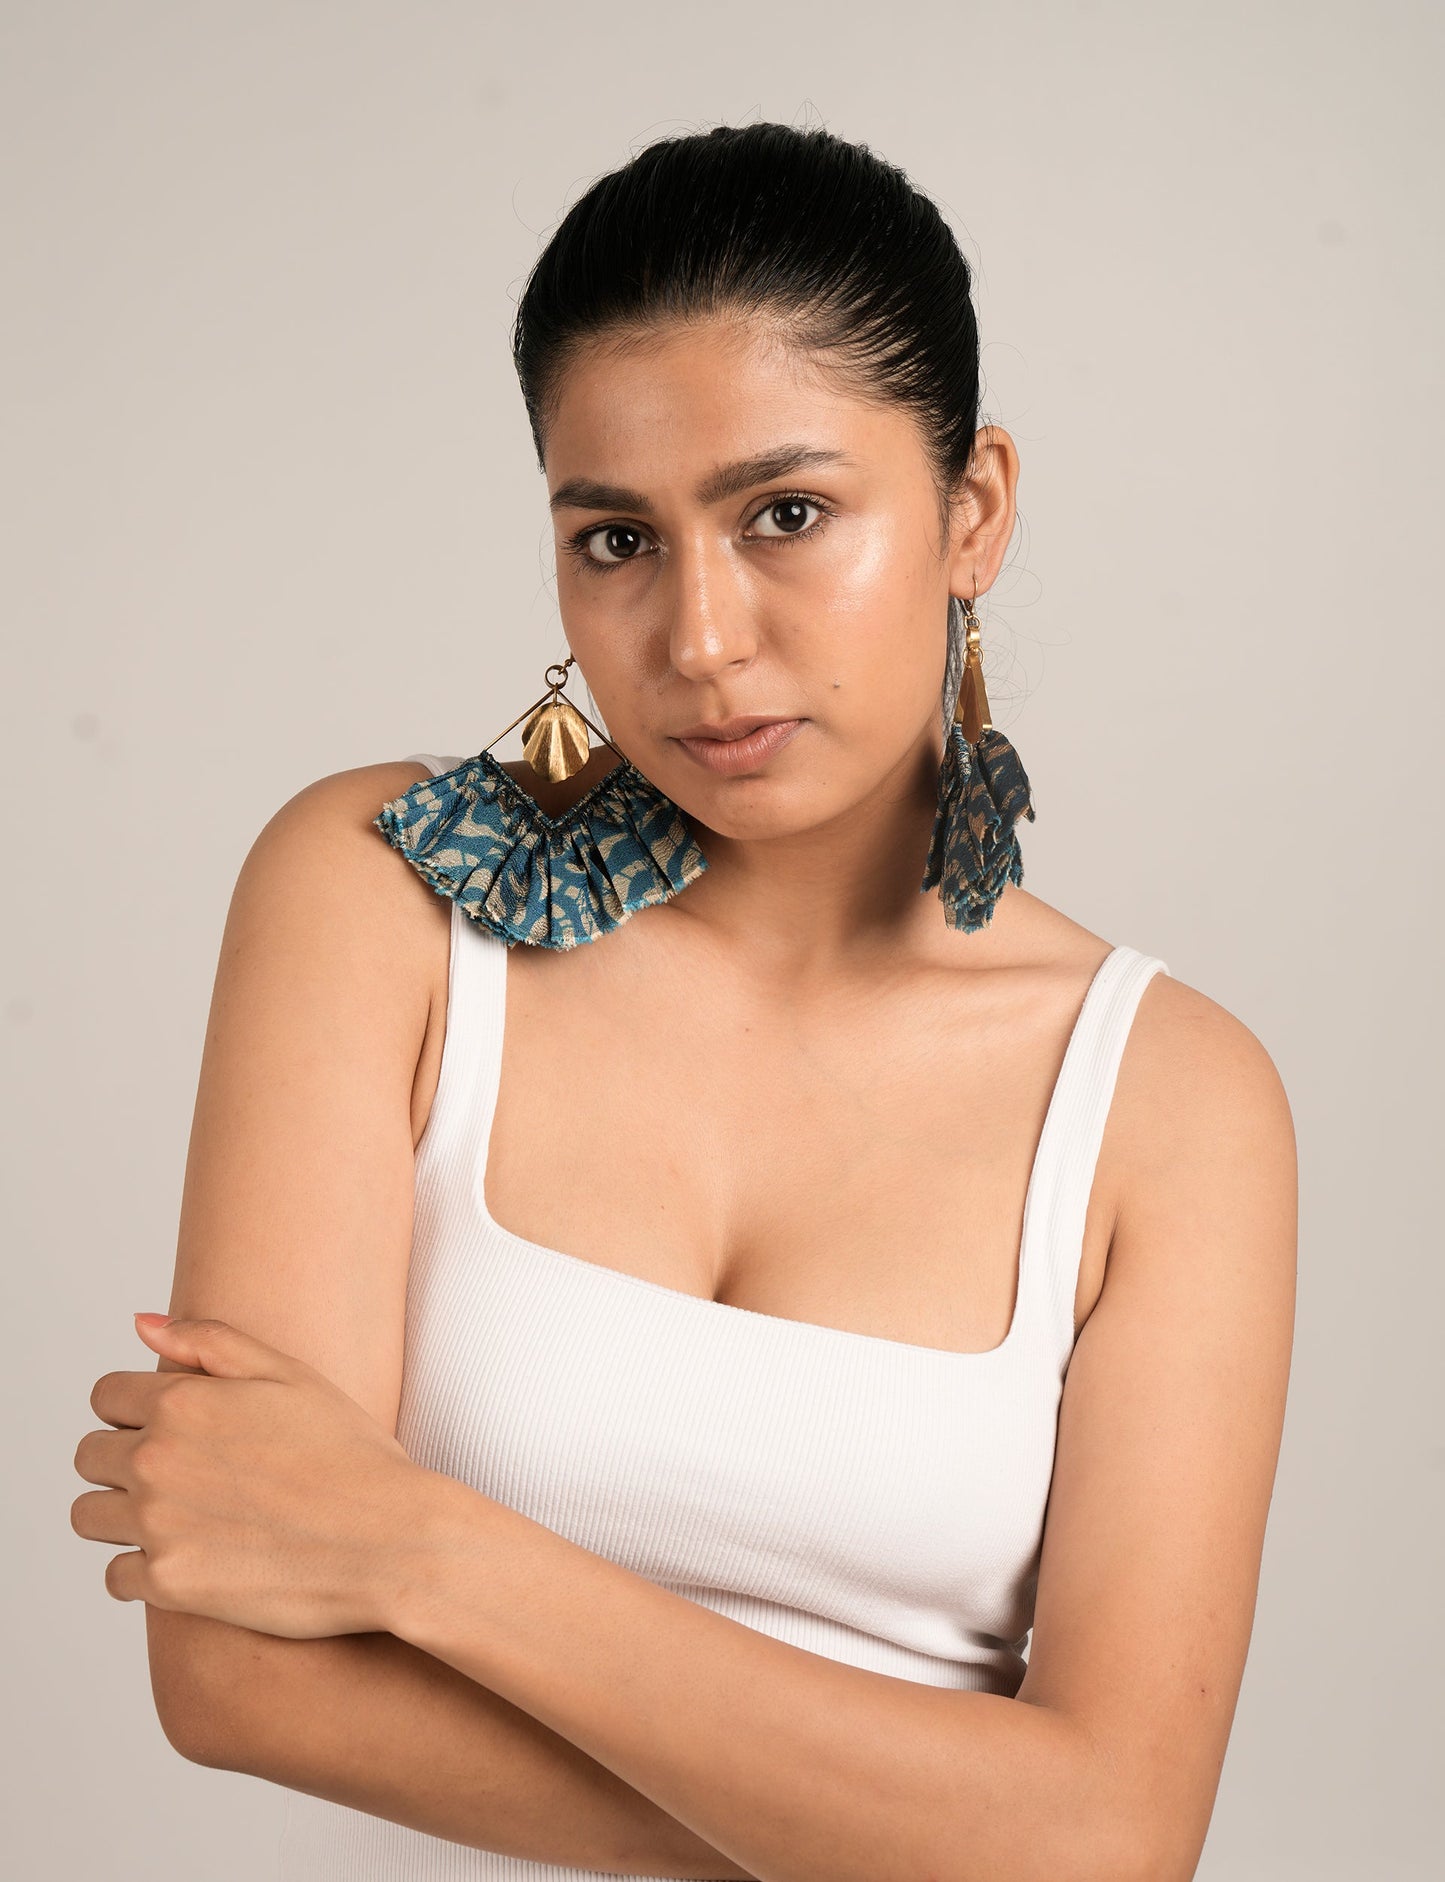 Bold and distinctive MAXI SQUARE EARRINGS – dramatic accessories with fabric frill, metallic charm, and a raw edge. Hypoallergy tested, skin-friendly metal hooks make these earrings unique and glamorous. Elevate your style with these eye-catching, nickel, and lead-free accessories.